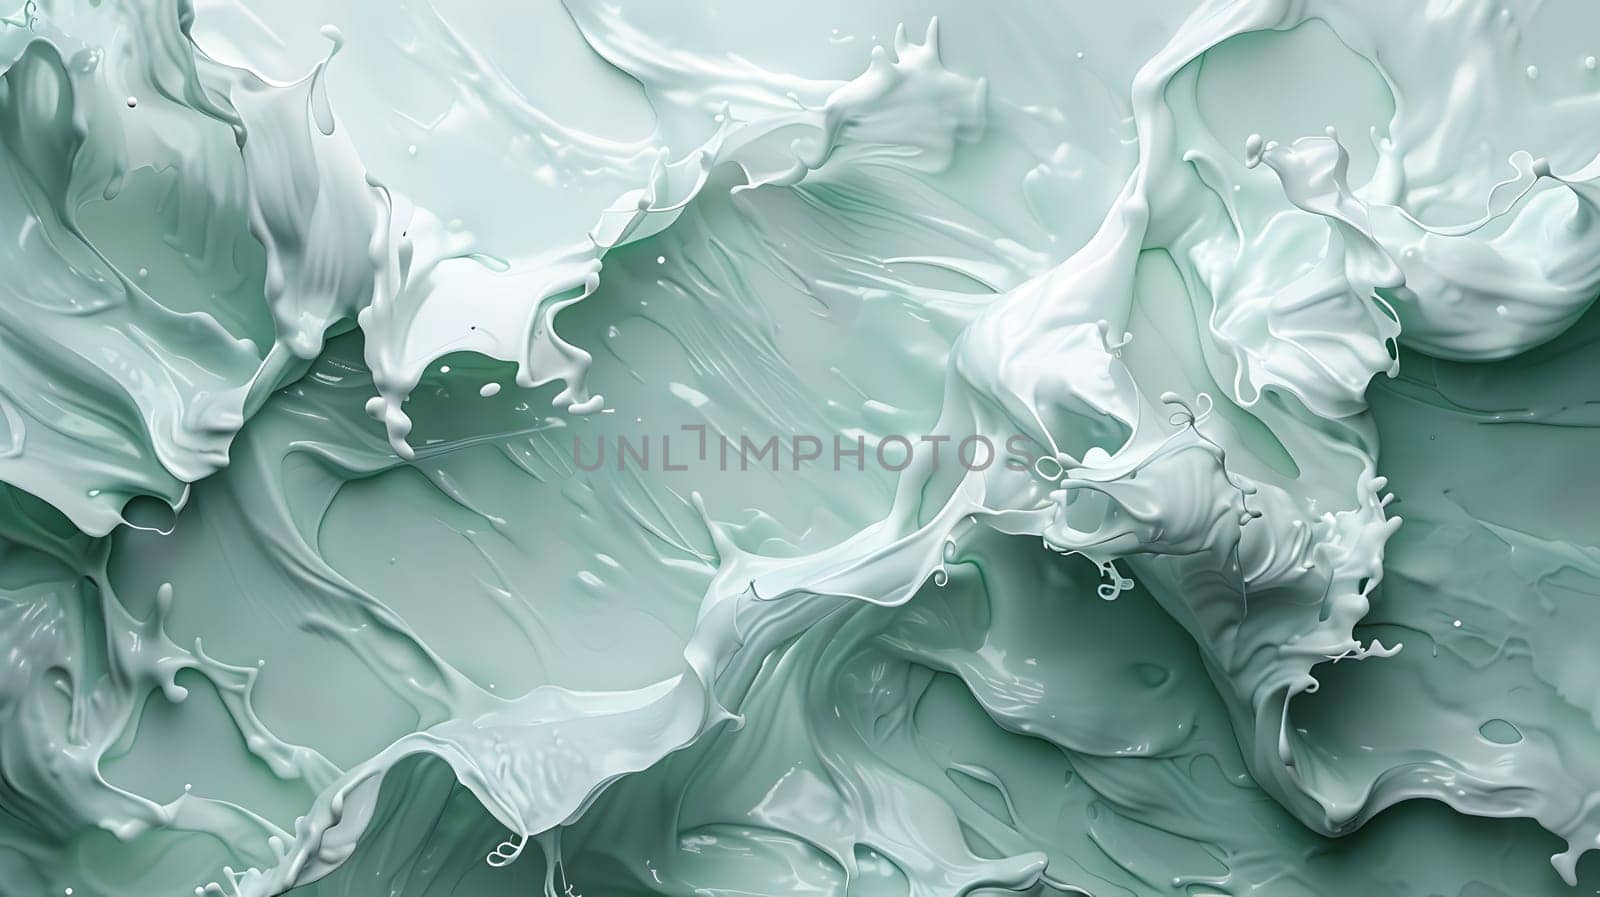 A close up of a swirling pattern of green and white liquid, resembling a geological phenomenon. The natural material forms a beautiful circle, creating a mesmerizing event